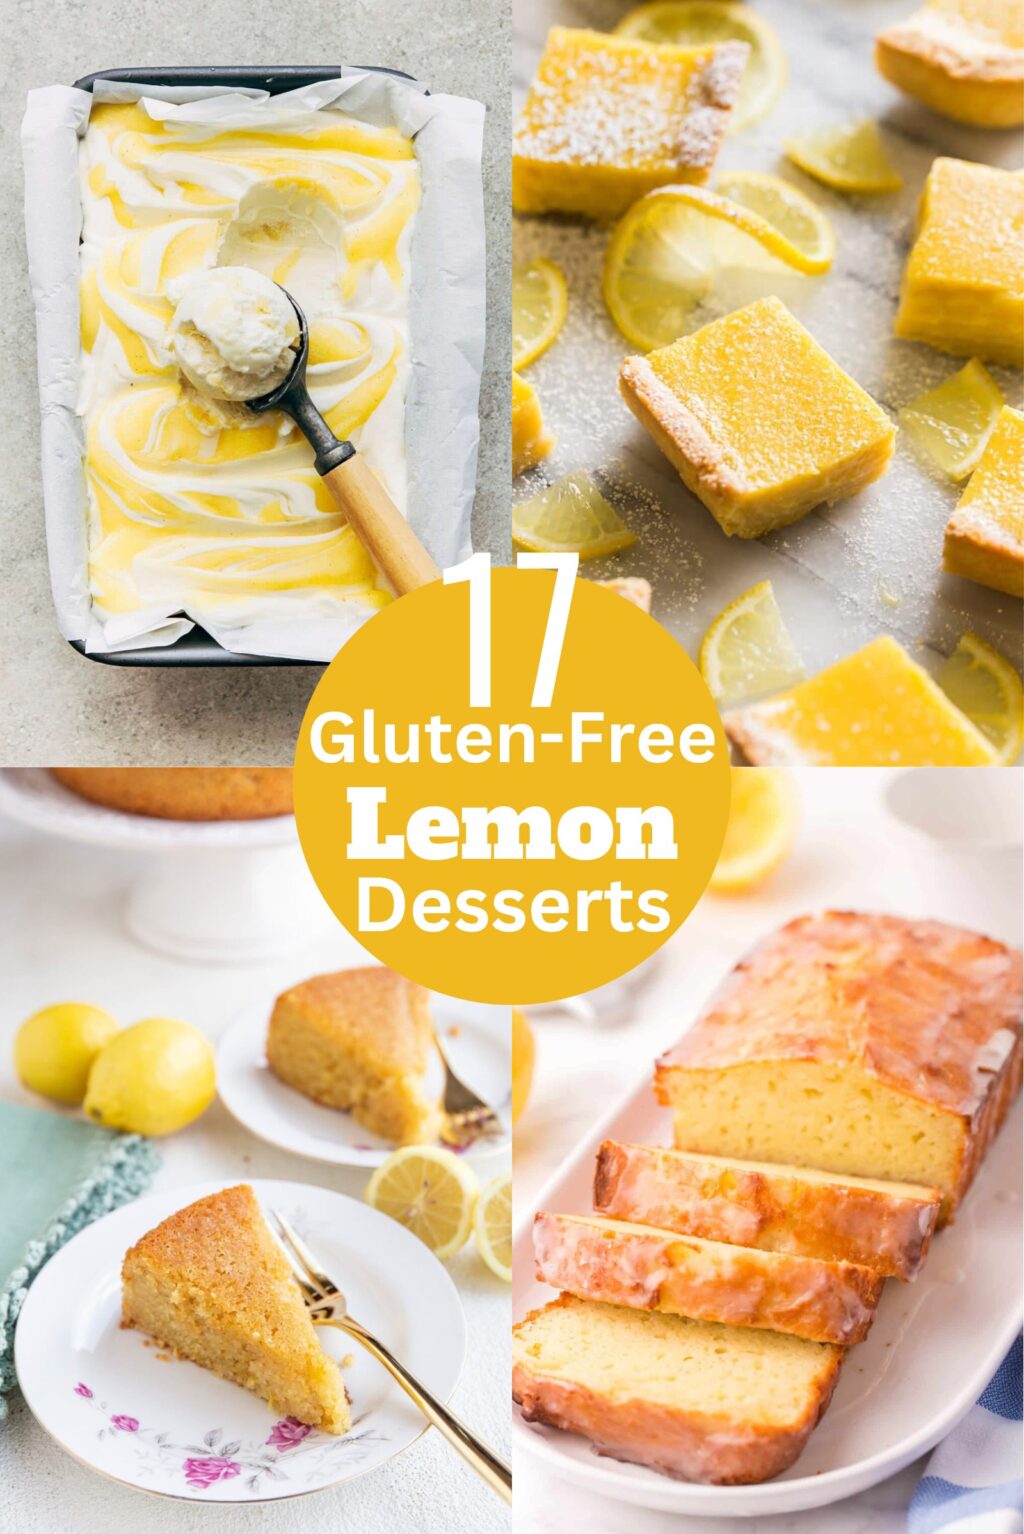 An image with 4 different gluten free lemon desserts.